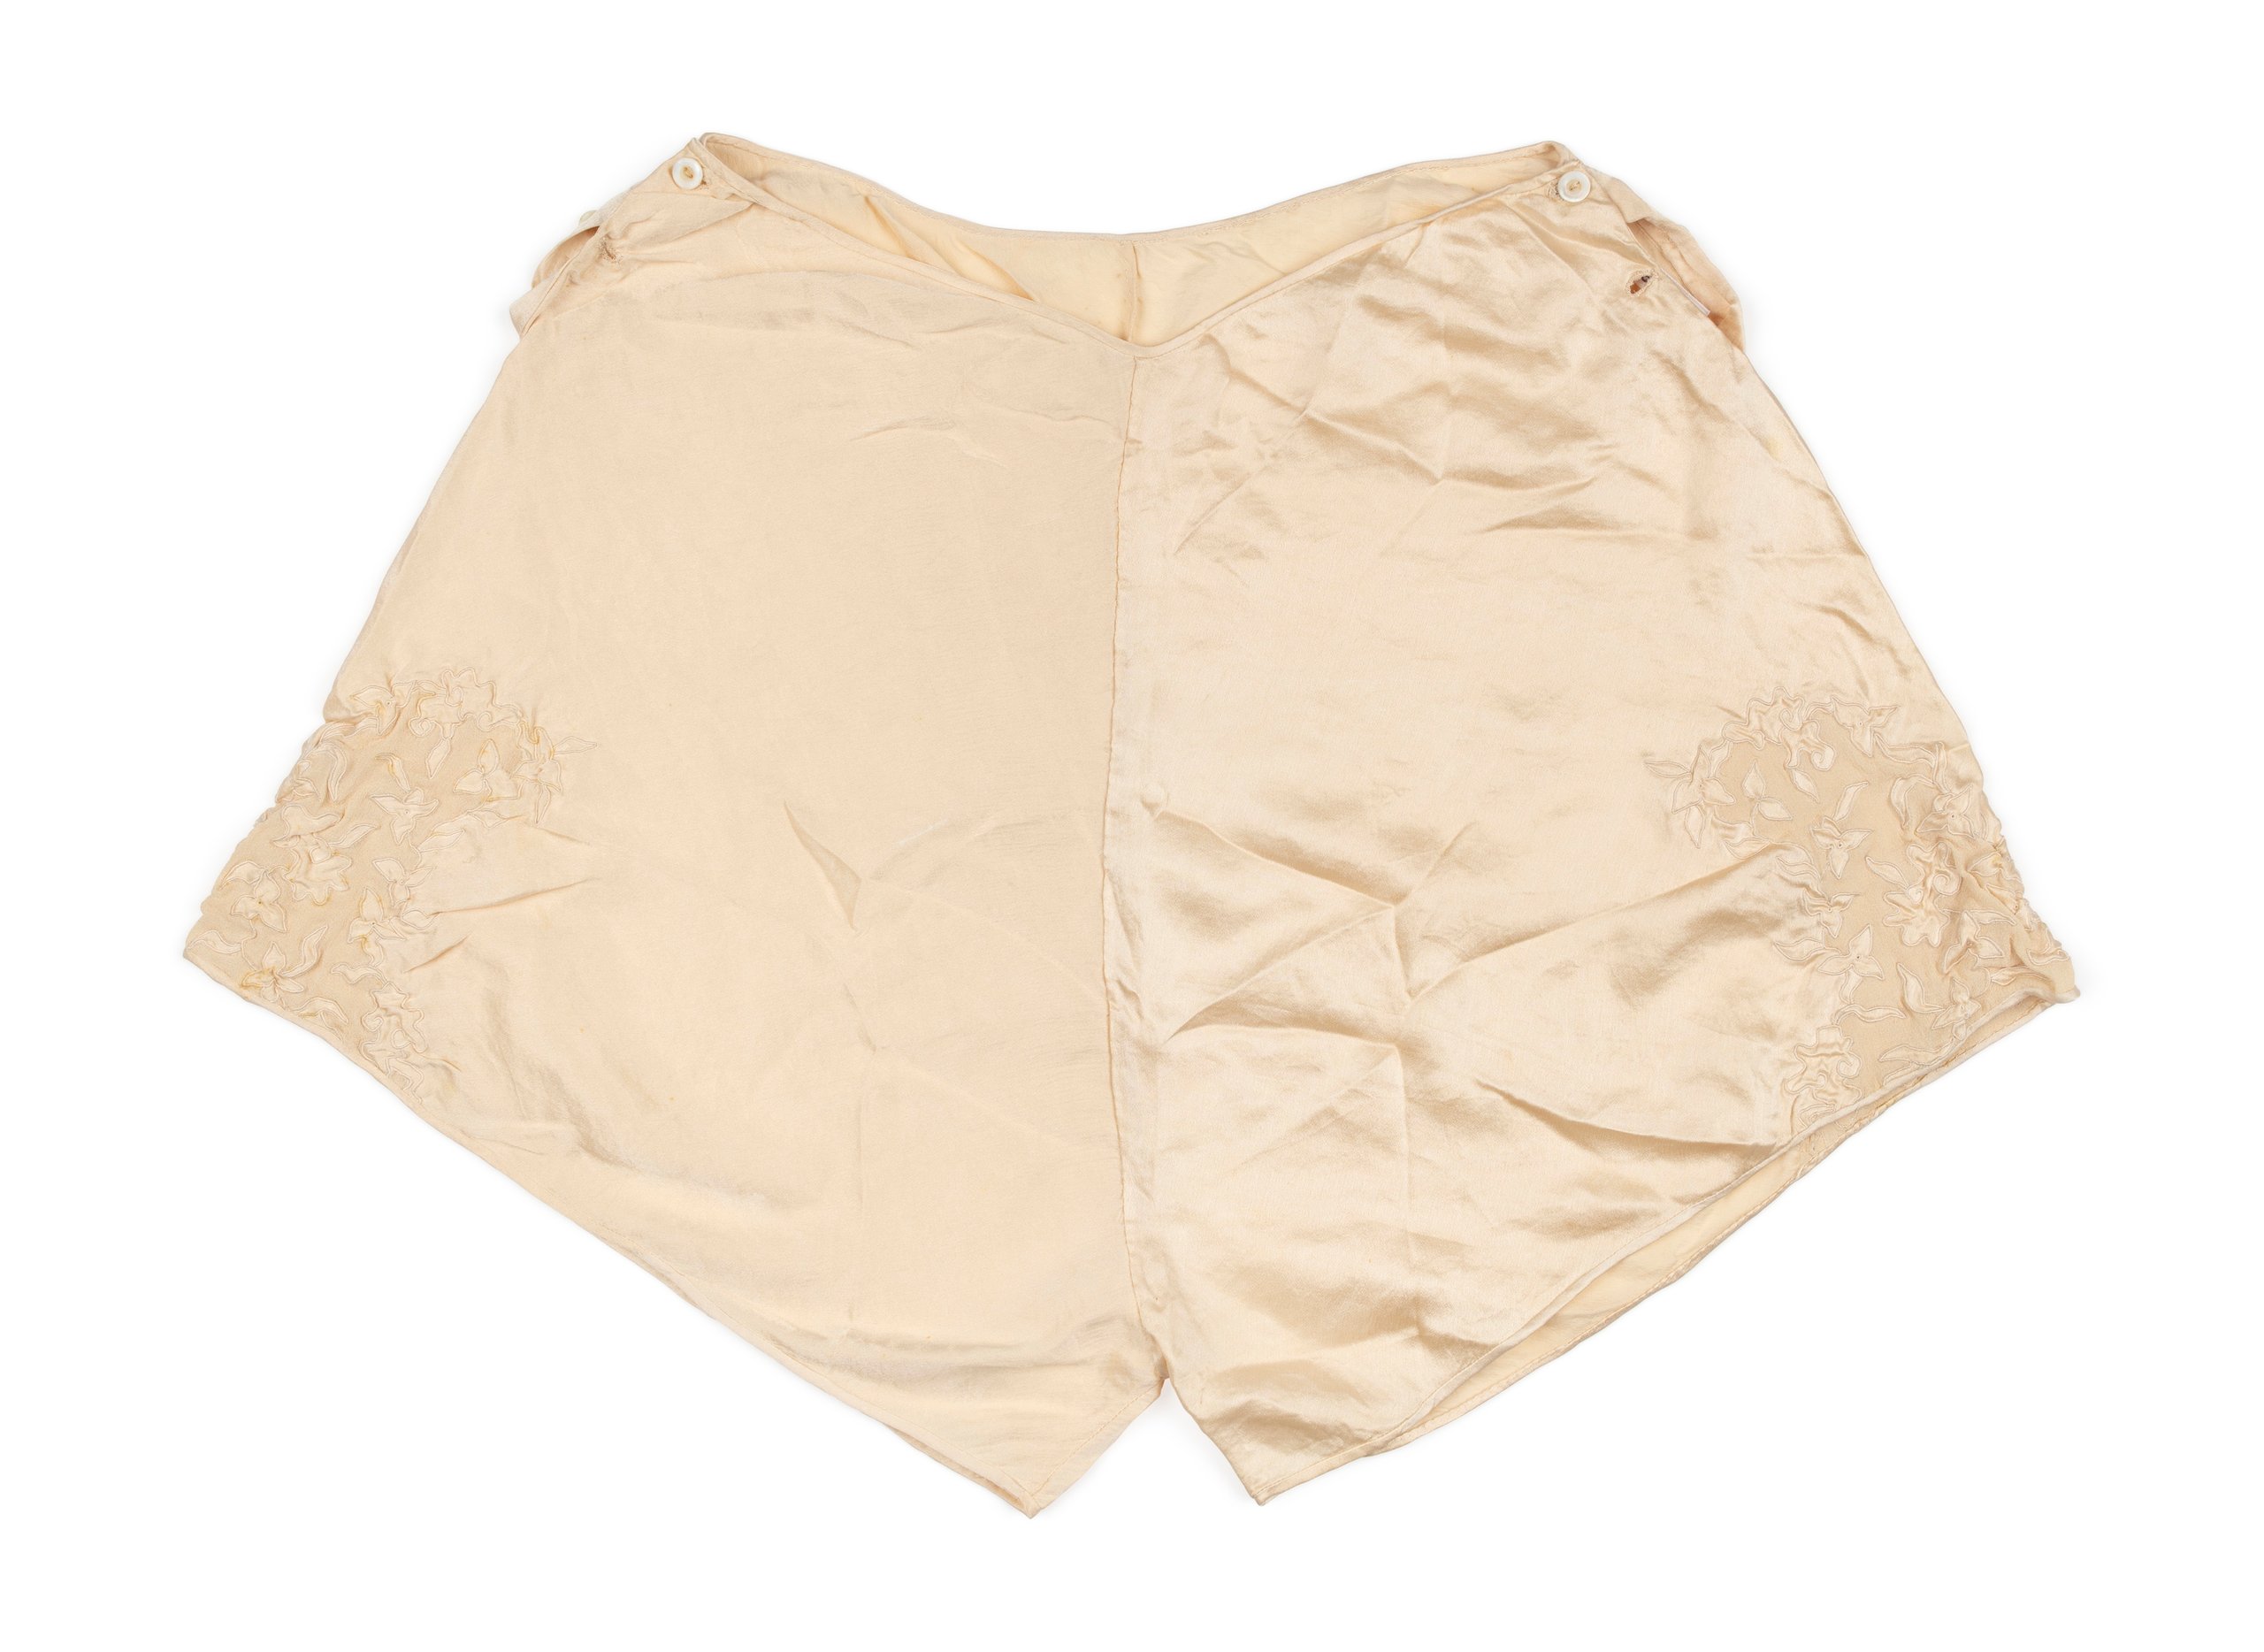 Womens underpants with floral applique